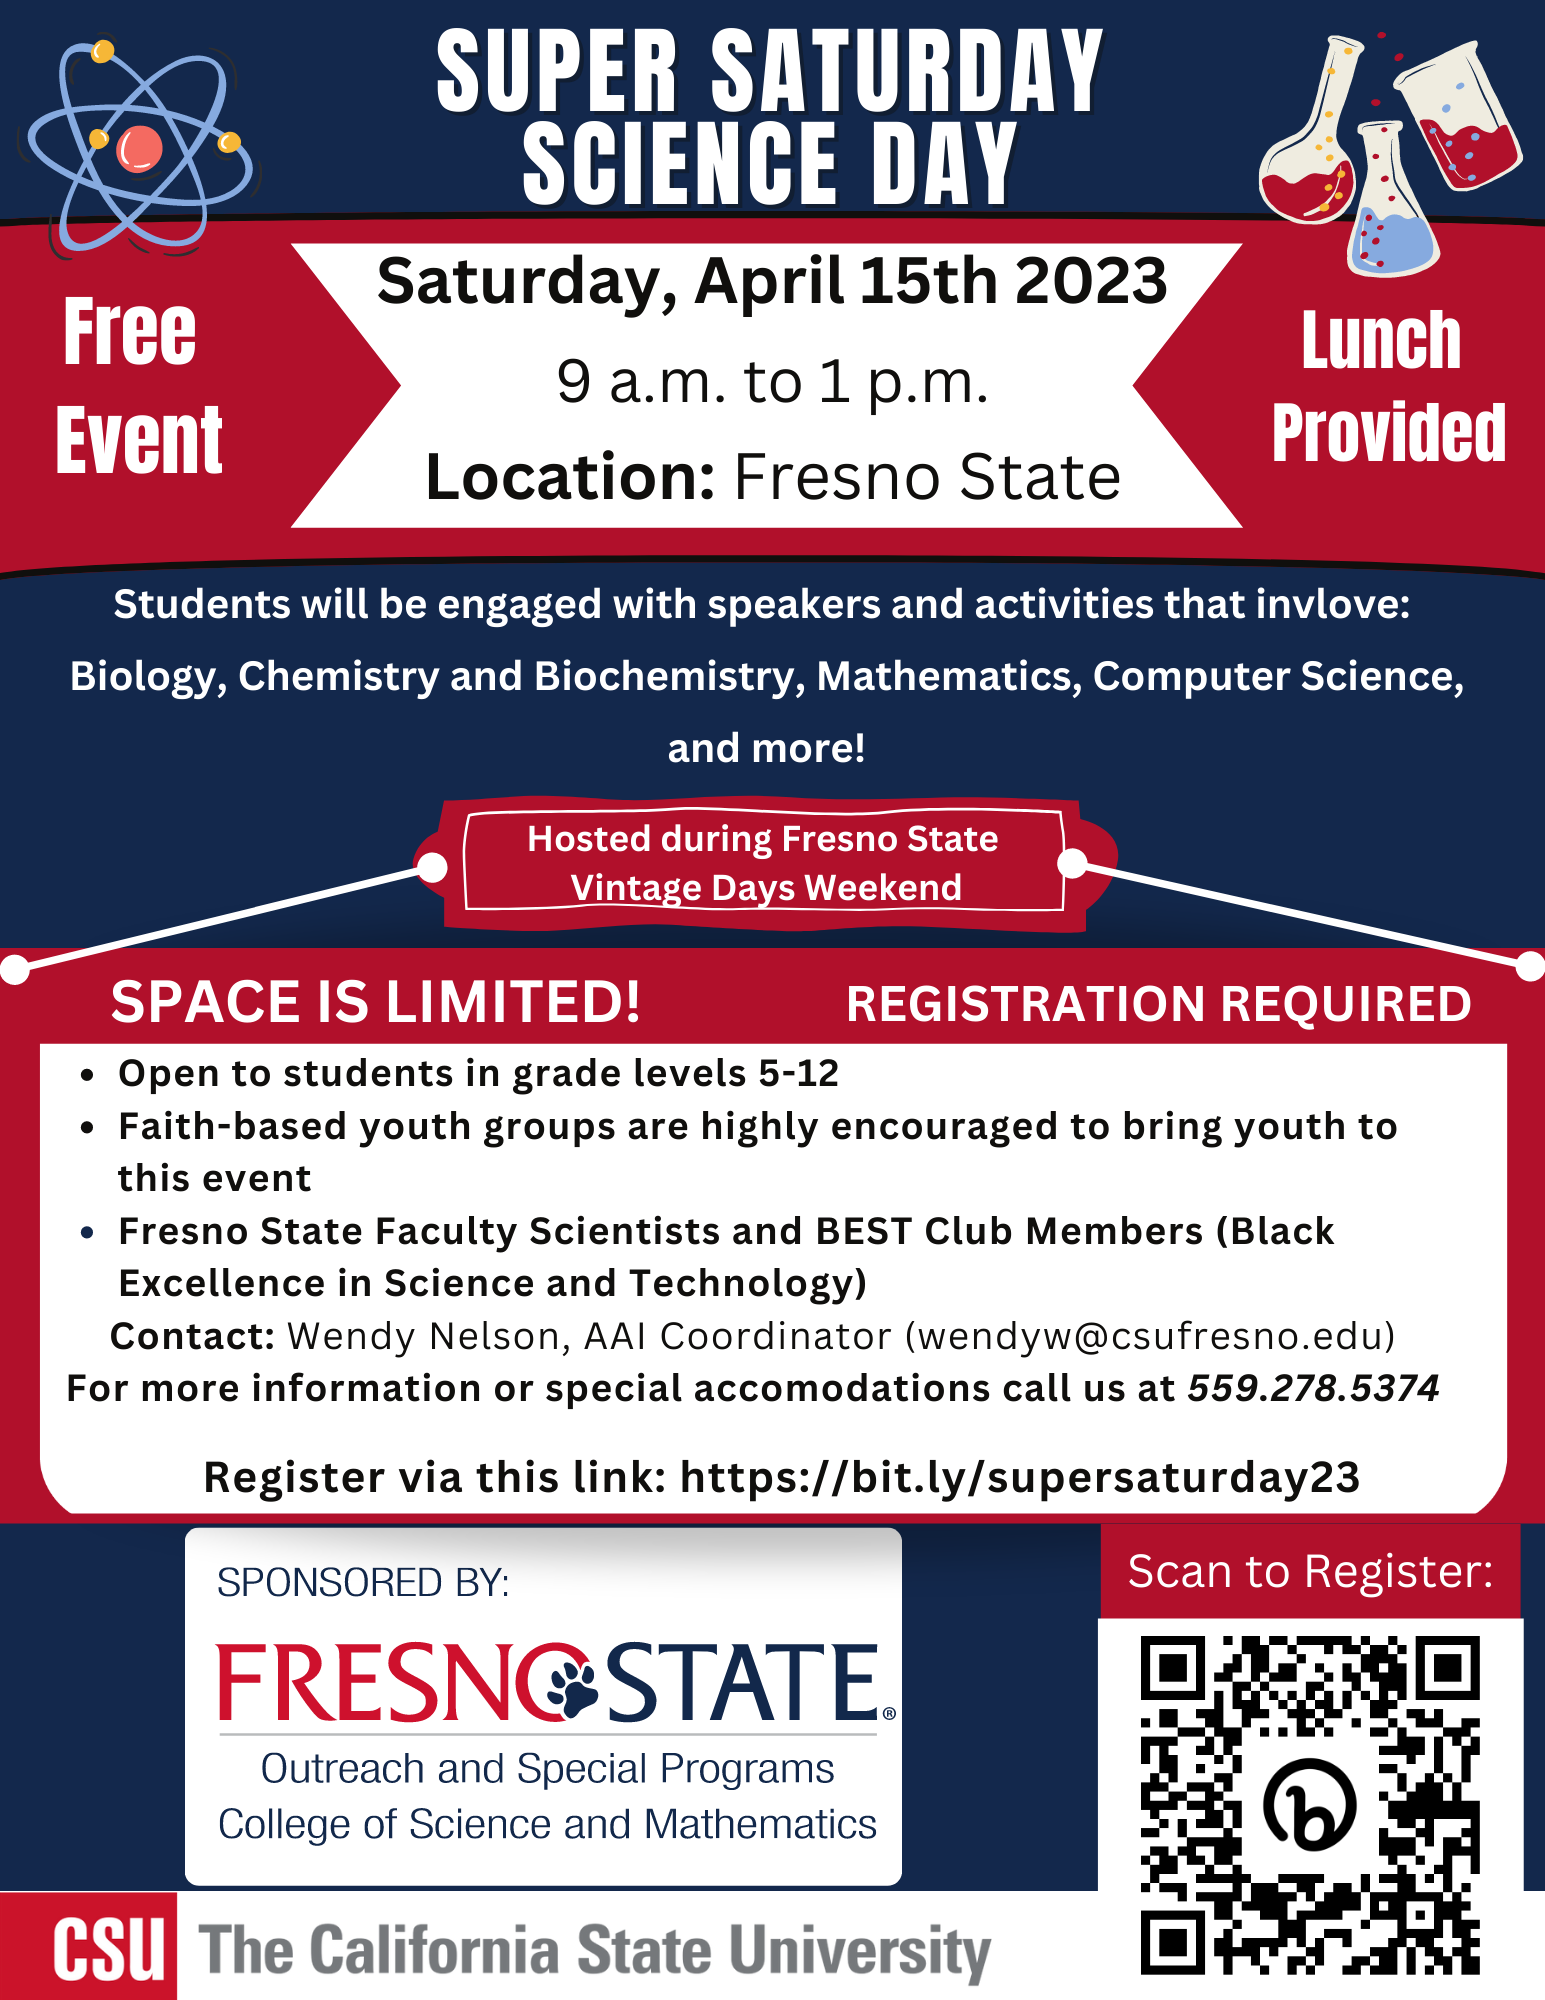 super saturday science day flyer. event held on april 15, 2023 from 9am to 1pm for 5th to 12th grade students.